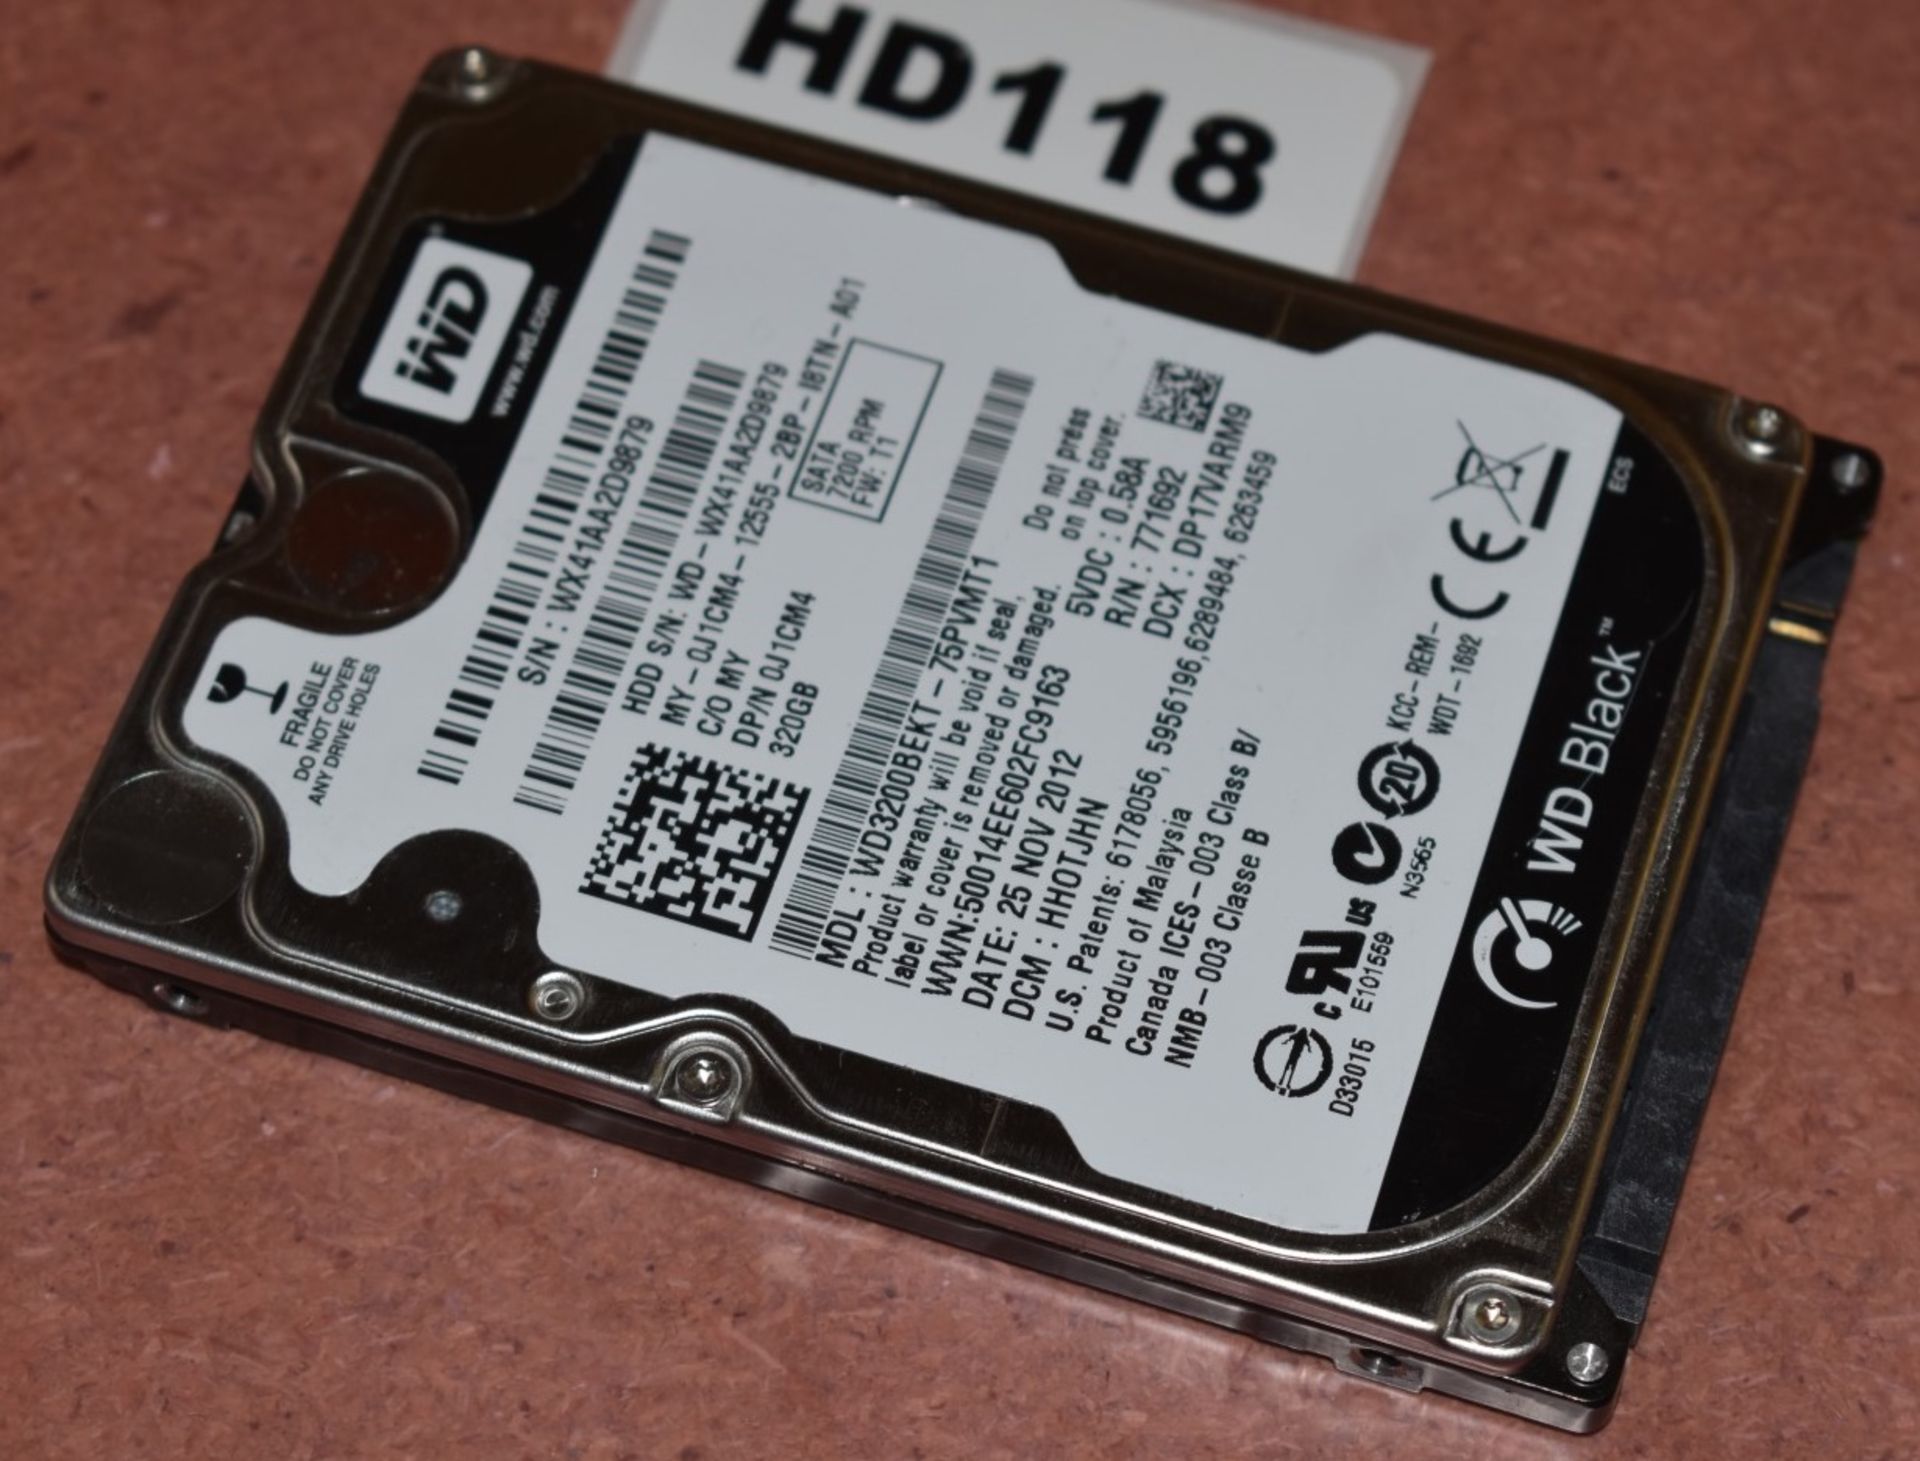 4 x Western Digital 320gb Black 2.5 Inch SATA Hard Drives - Tested and Formatted - HD113/114/118/124 - Image 3 of 4